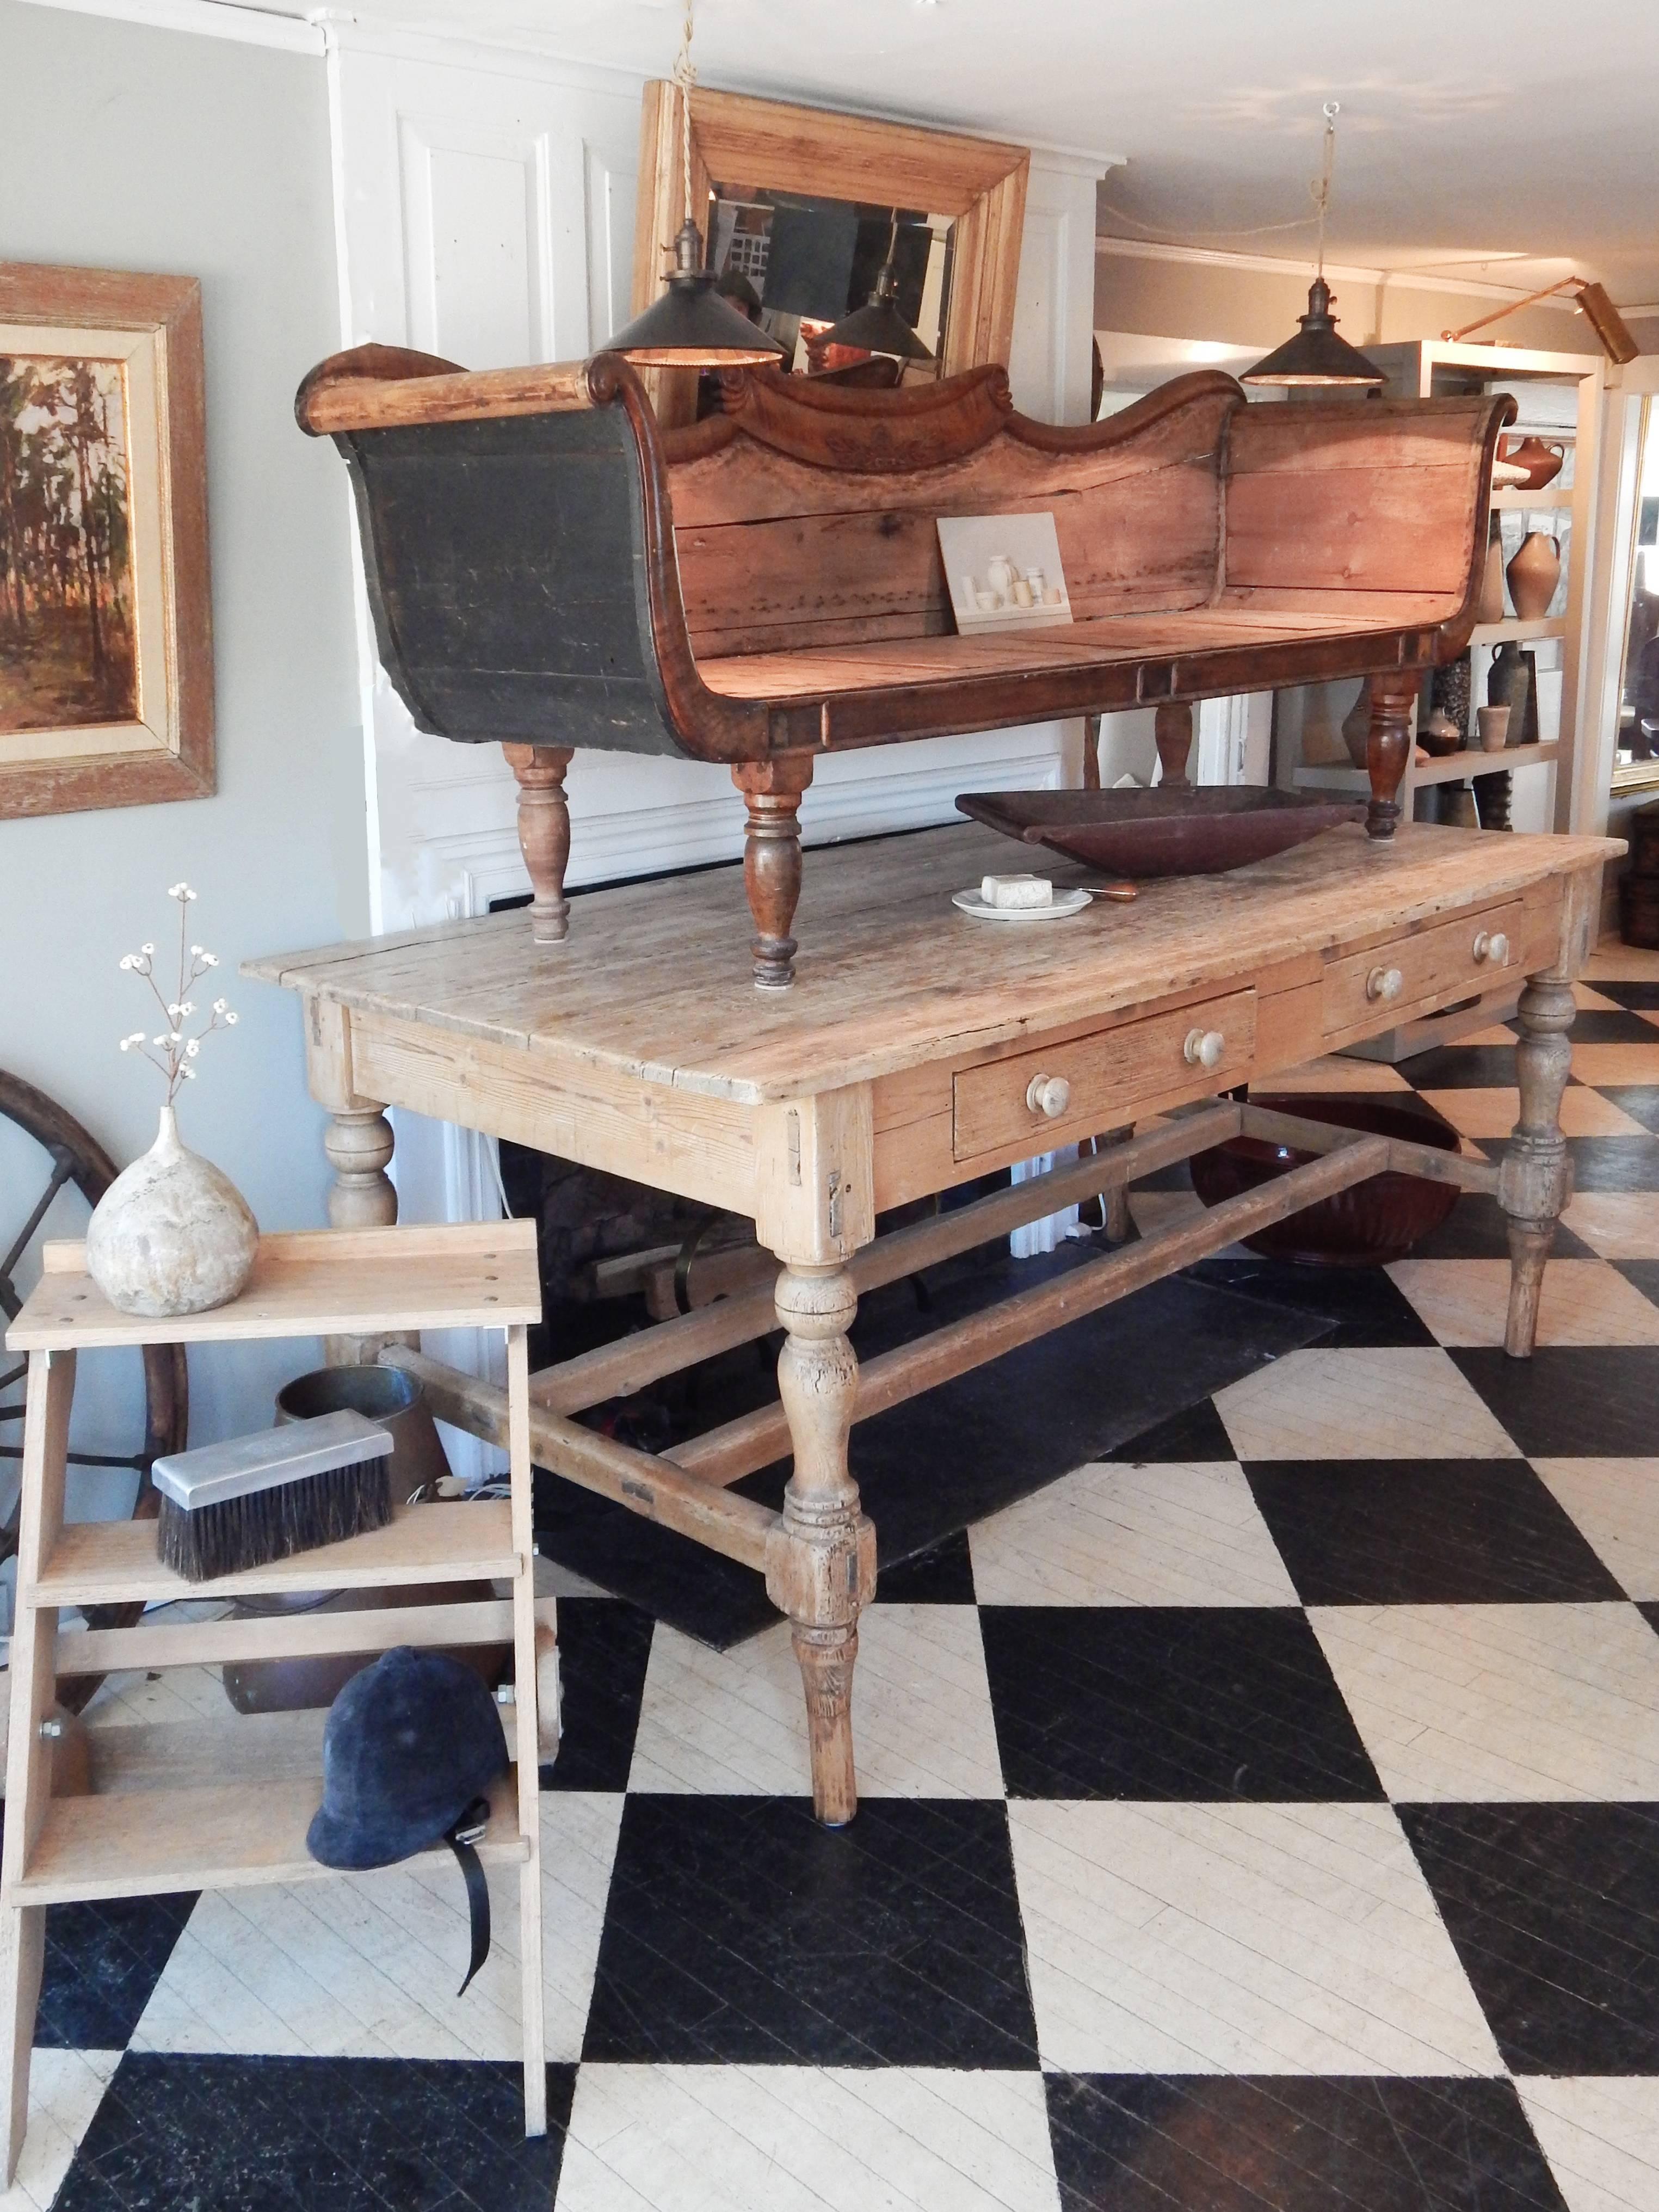 Exceptional French pine work table with drawers. Legs have been extended to create a kitchen island/ work surface. Incredible aged patina.
Clearance under drawers 29 1/4 inches.